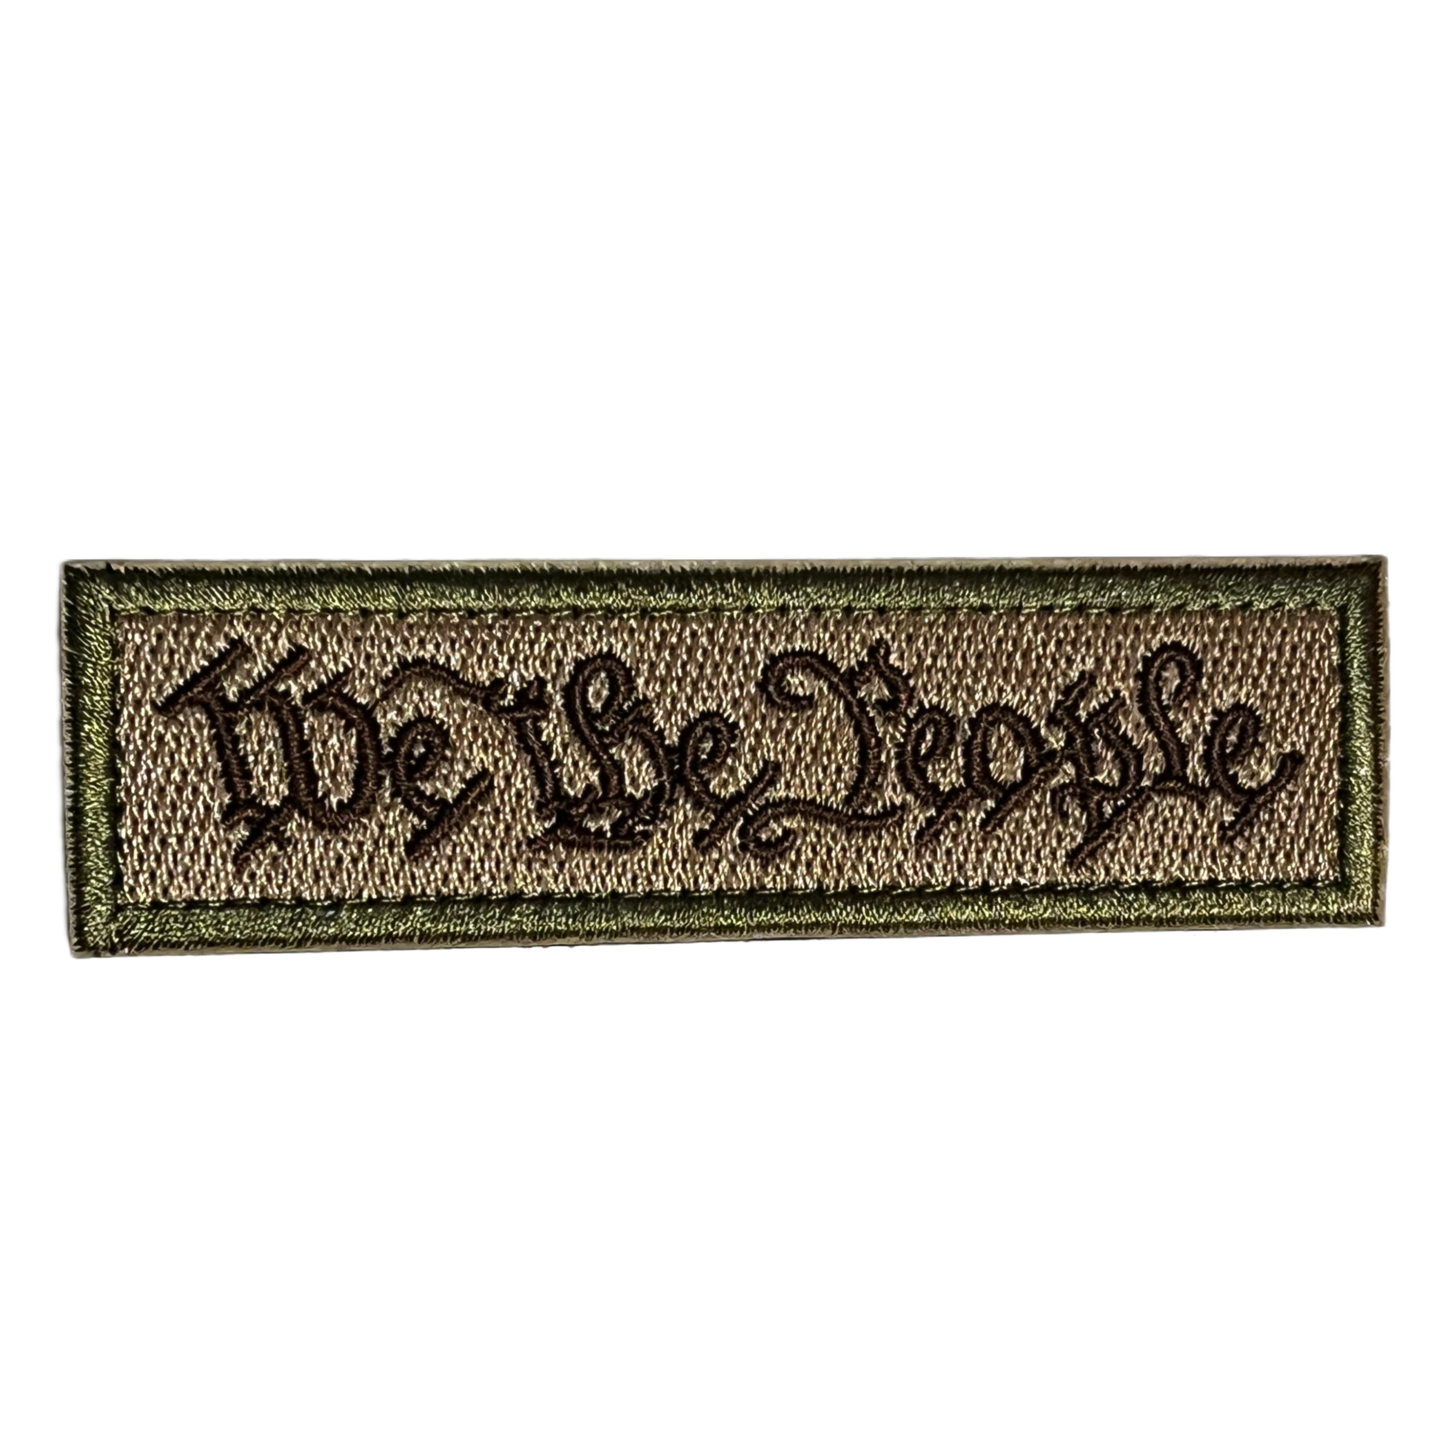 We The People Sewn Morale Patch (Coyote Brown)